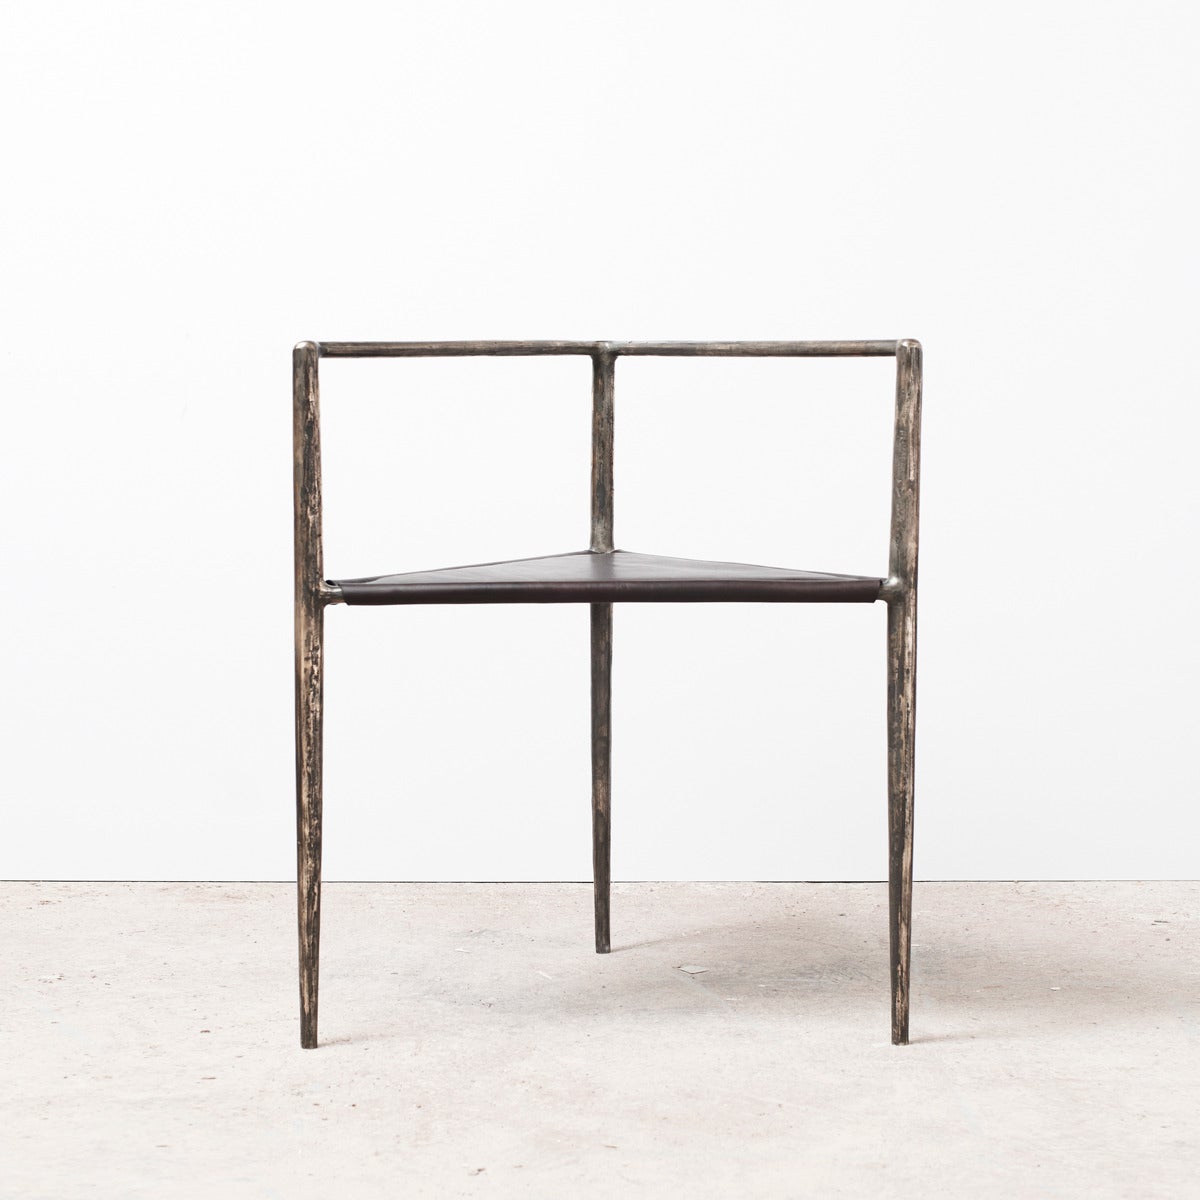 The Alchemy Chair by Rick Owens is conceptually established on a triangular prism wireframe. Its Brutalist bronze legs and arms are elegantly tapered and textured, comfortably dissected by a plane of black leather upholstery. Not only is the Alchemy